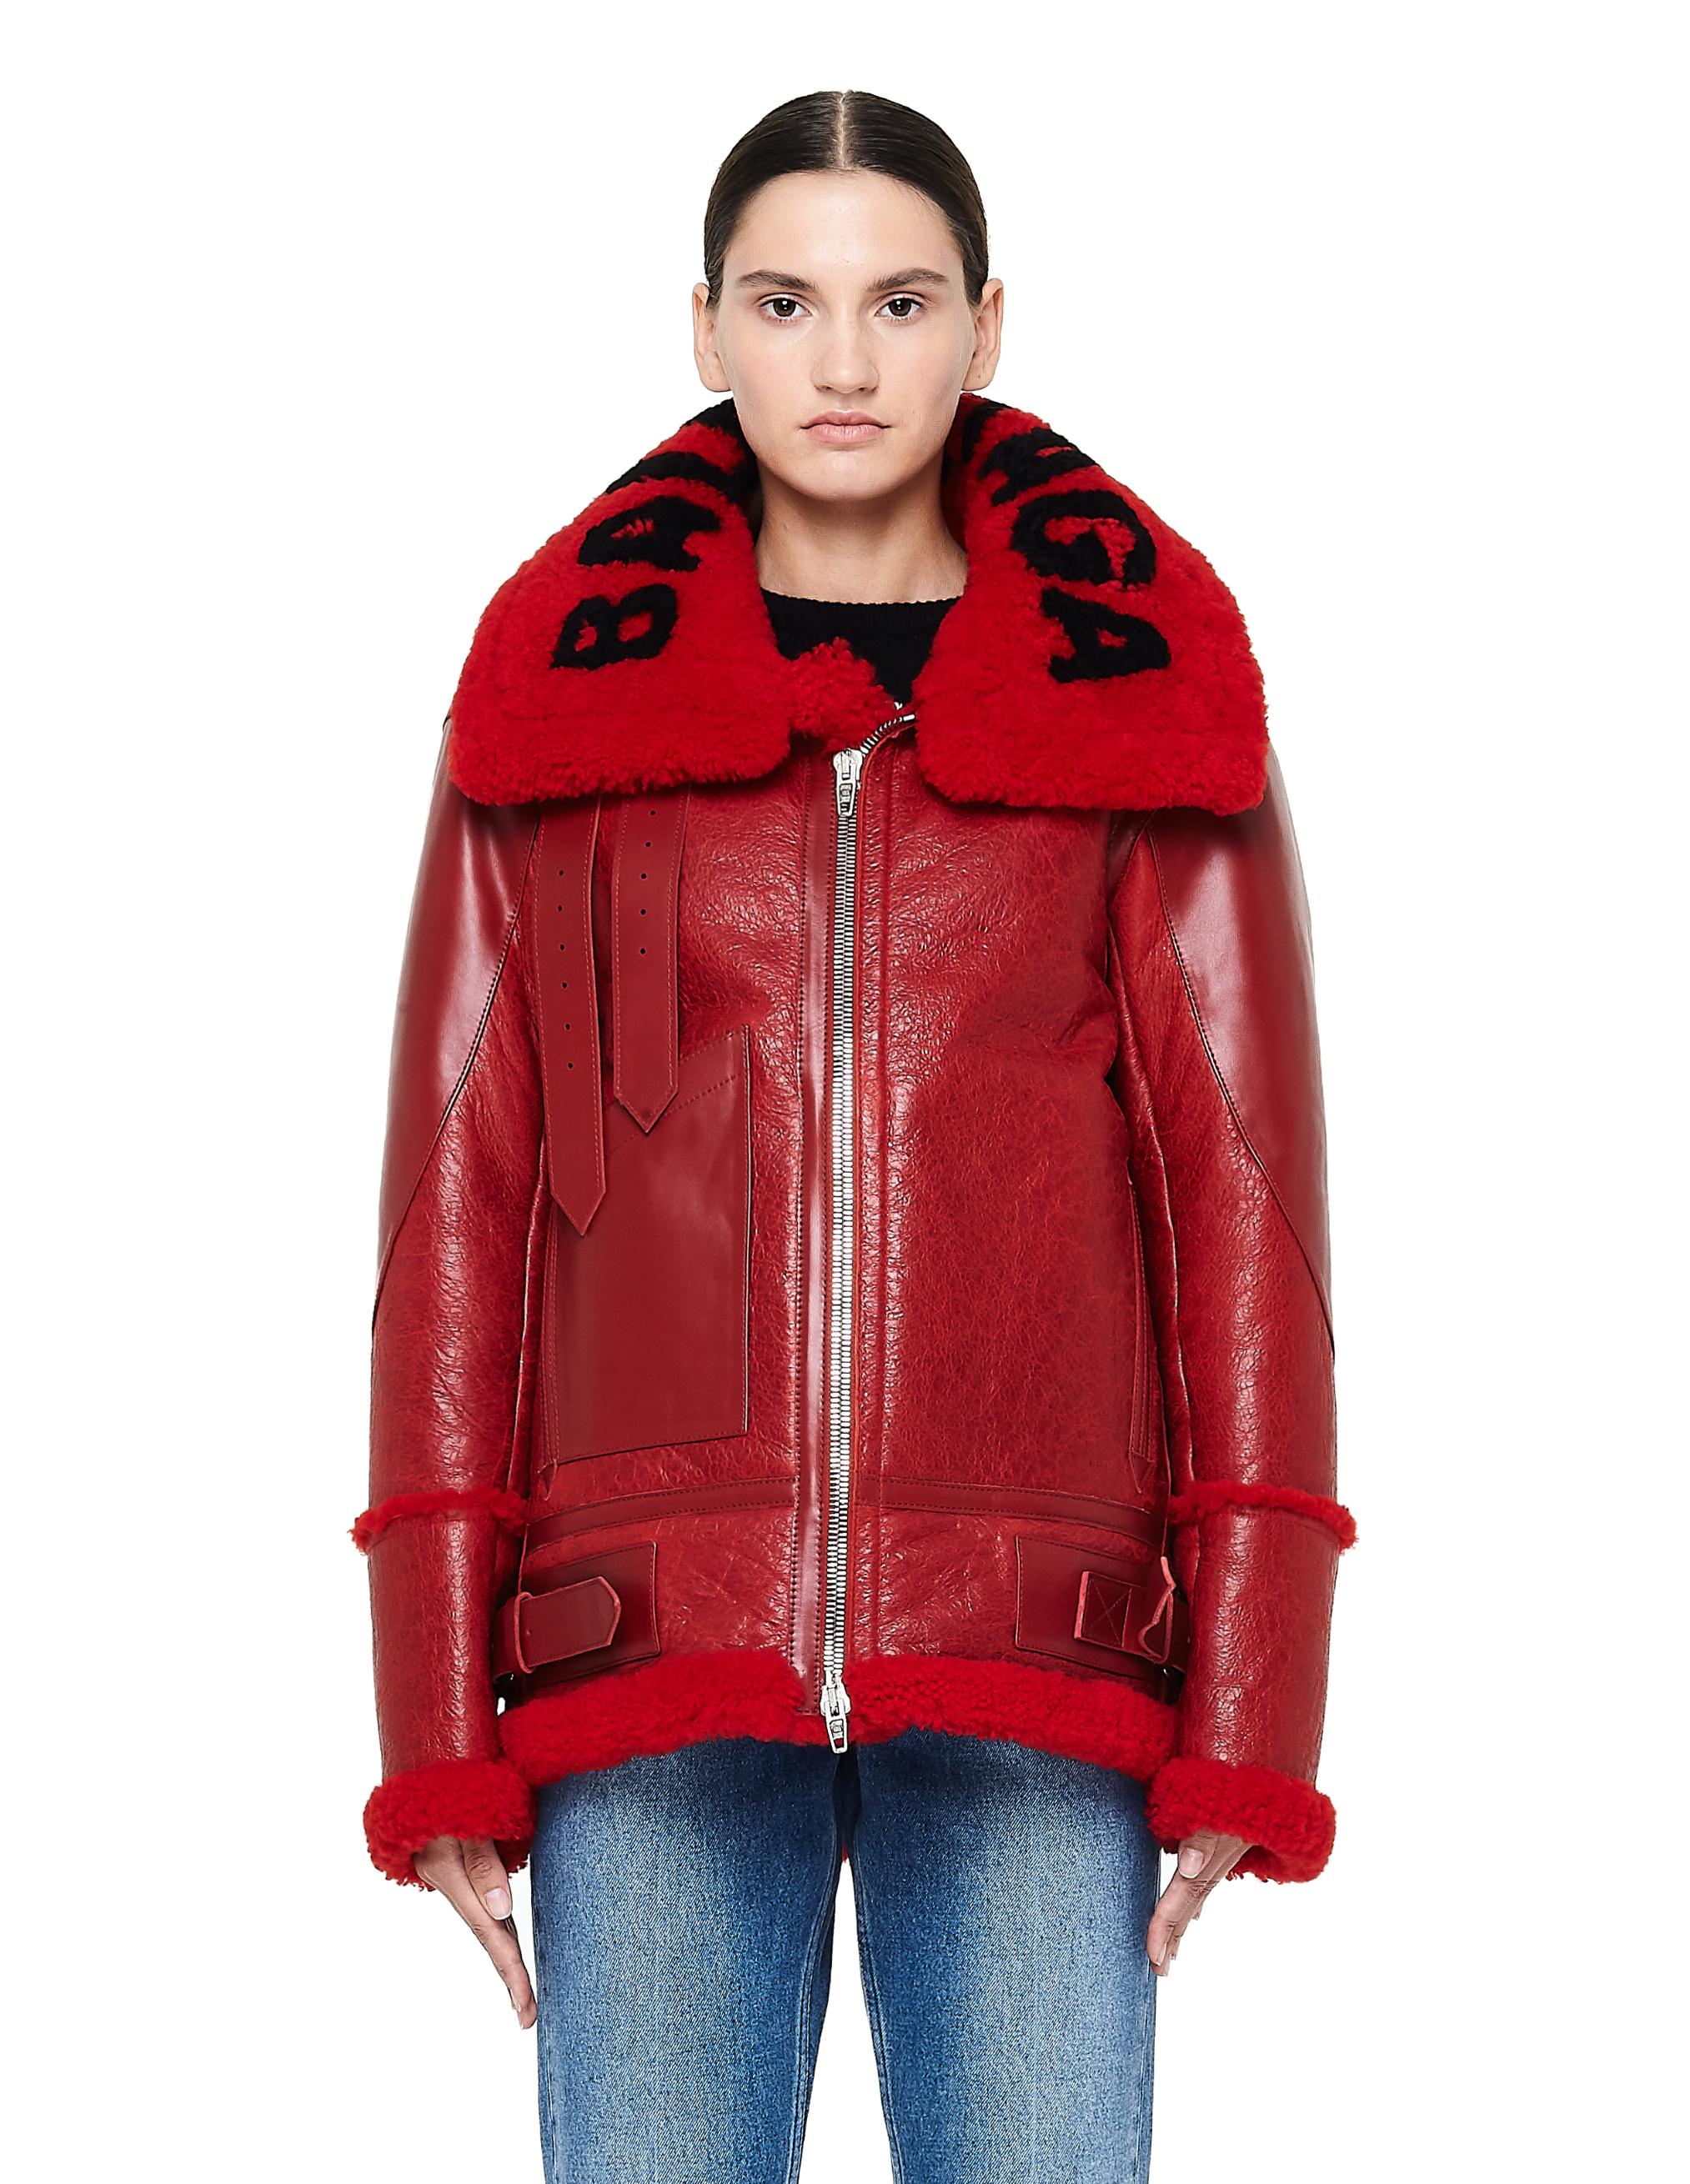 new BALENCIAGA Demna 2018 Le Bombardier red logo shearling leather jacket FR40 L 
Reference: TGAS/C00430 
Brand: Balenciaga 
Designer: Demna 
Collection: 2018 Runway 
Material: Leather 
Color: Red 
Pattern: Sikud 
Closure: Zip 
Extra Detail: